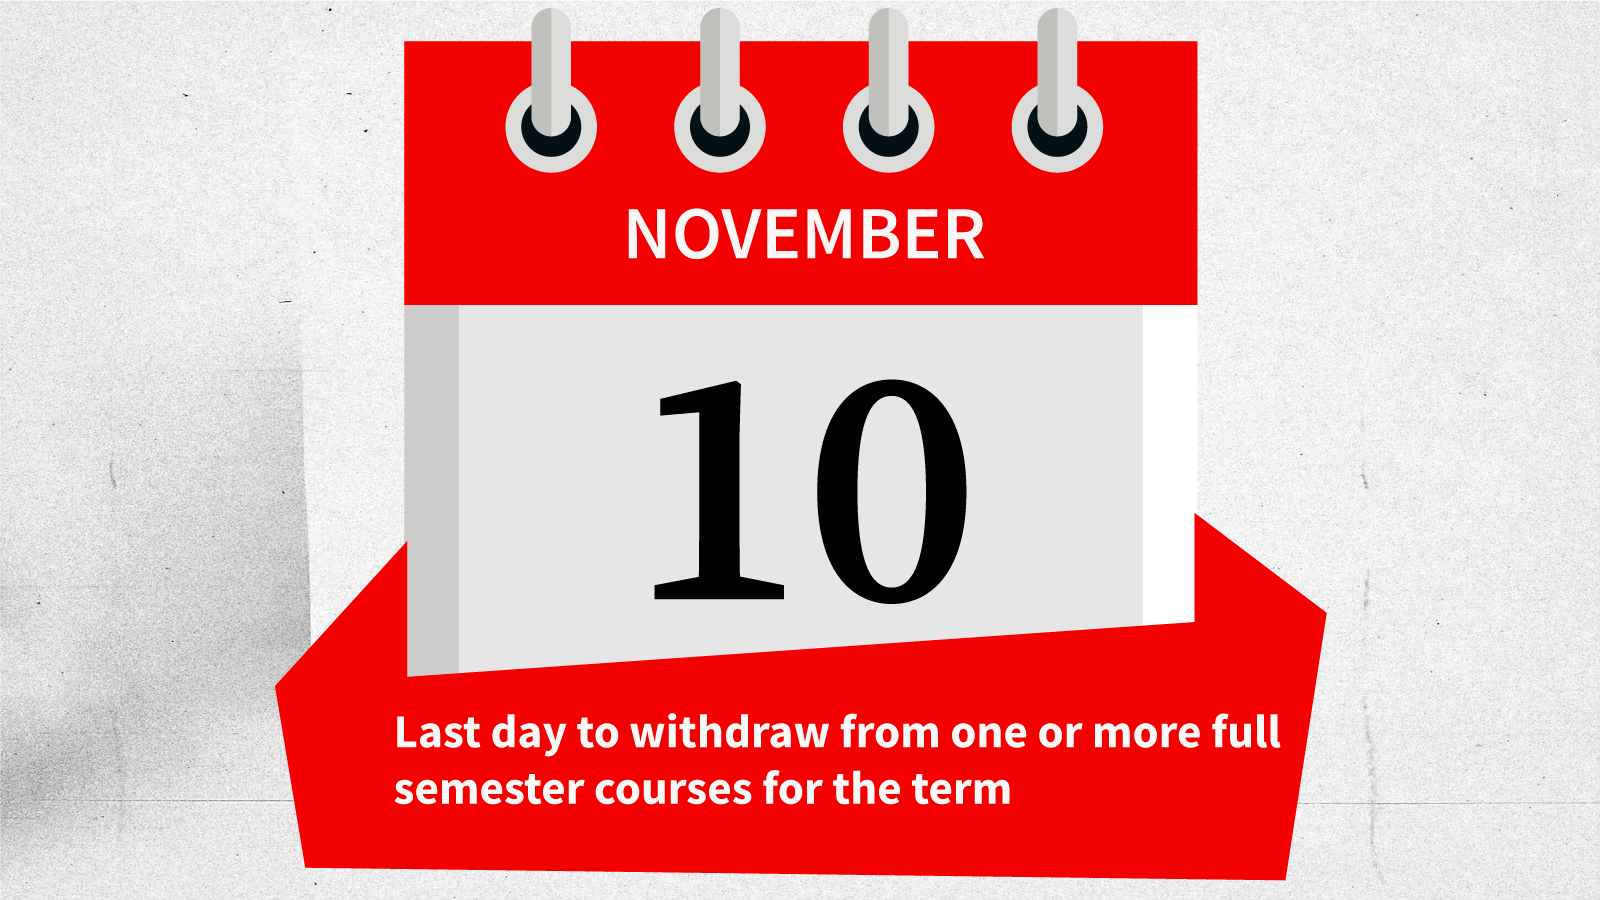 November 10: Last day to Withdraw from one or more full semester courses for the term